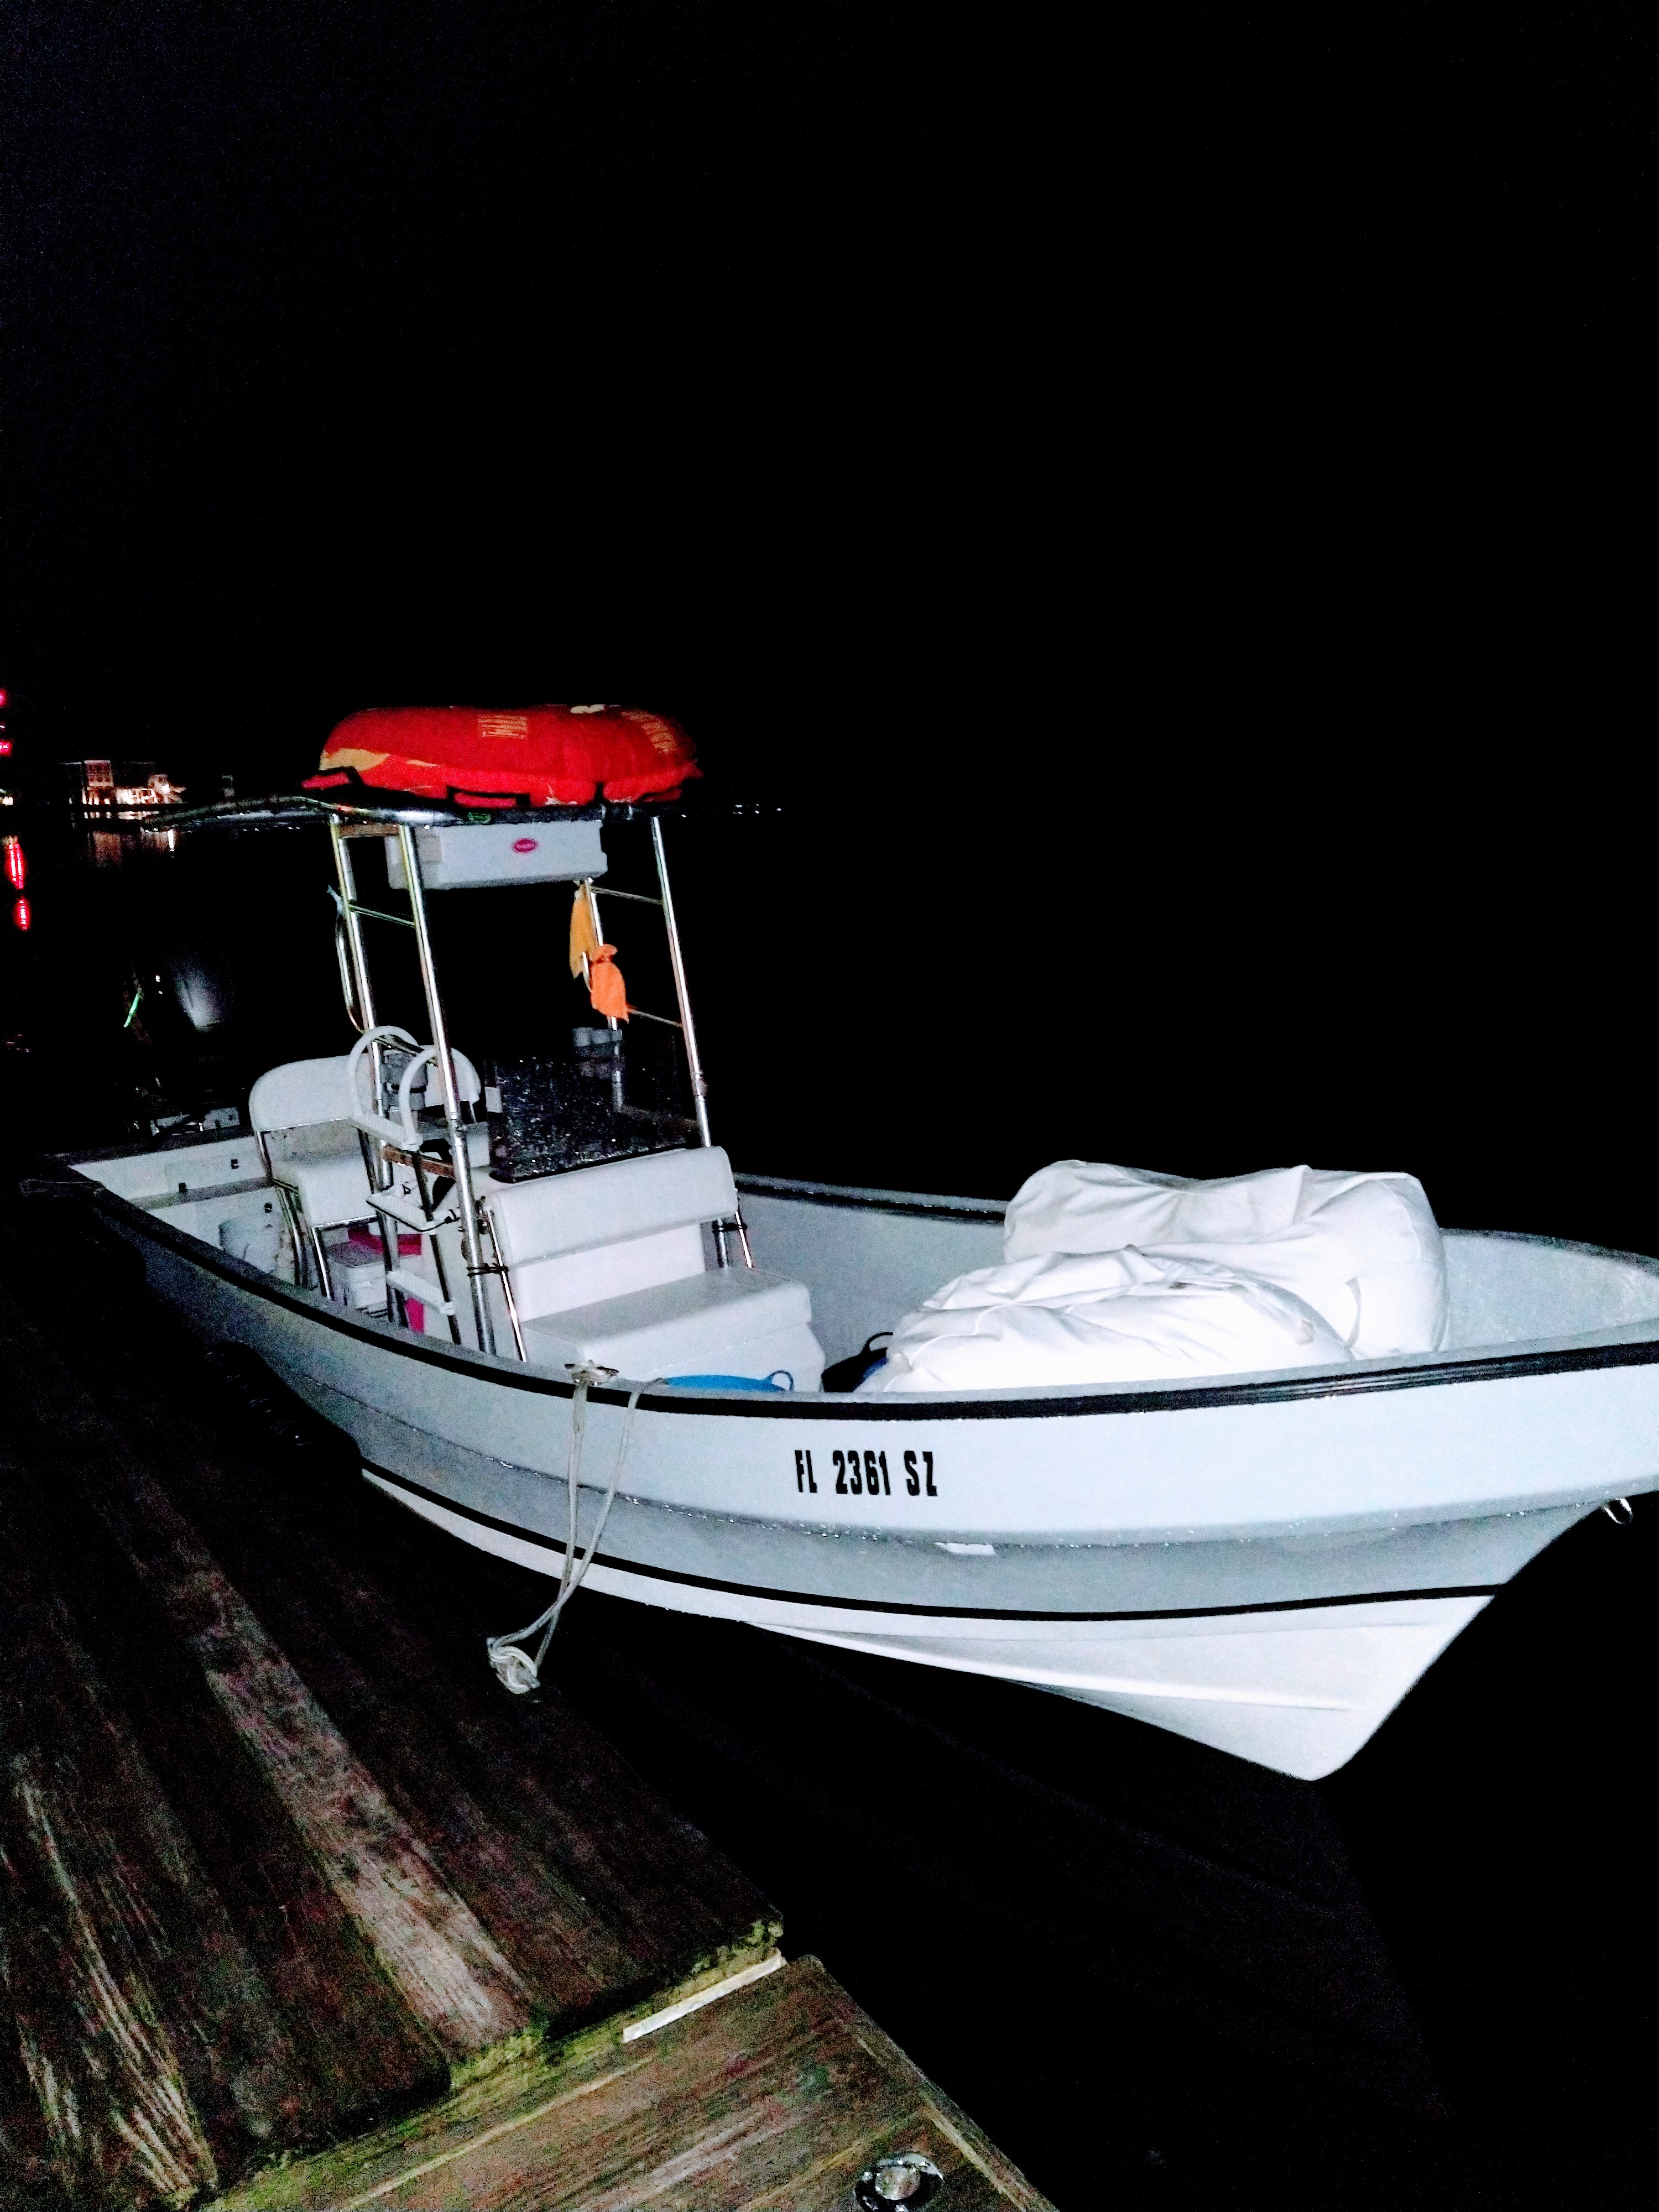 2021 23 foot none Panga Power boat for sale in Pompano Beach, FL - image 3 